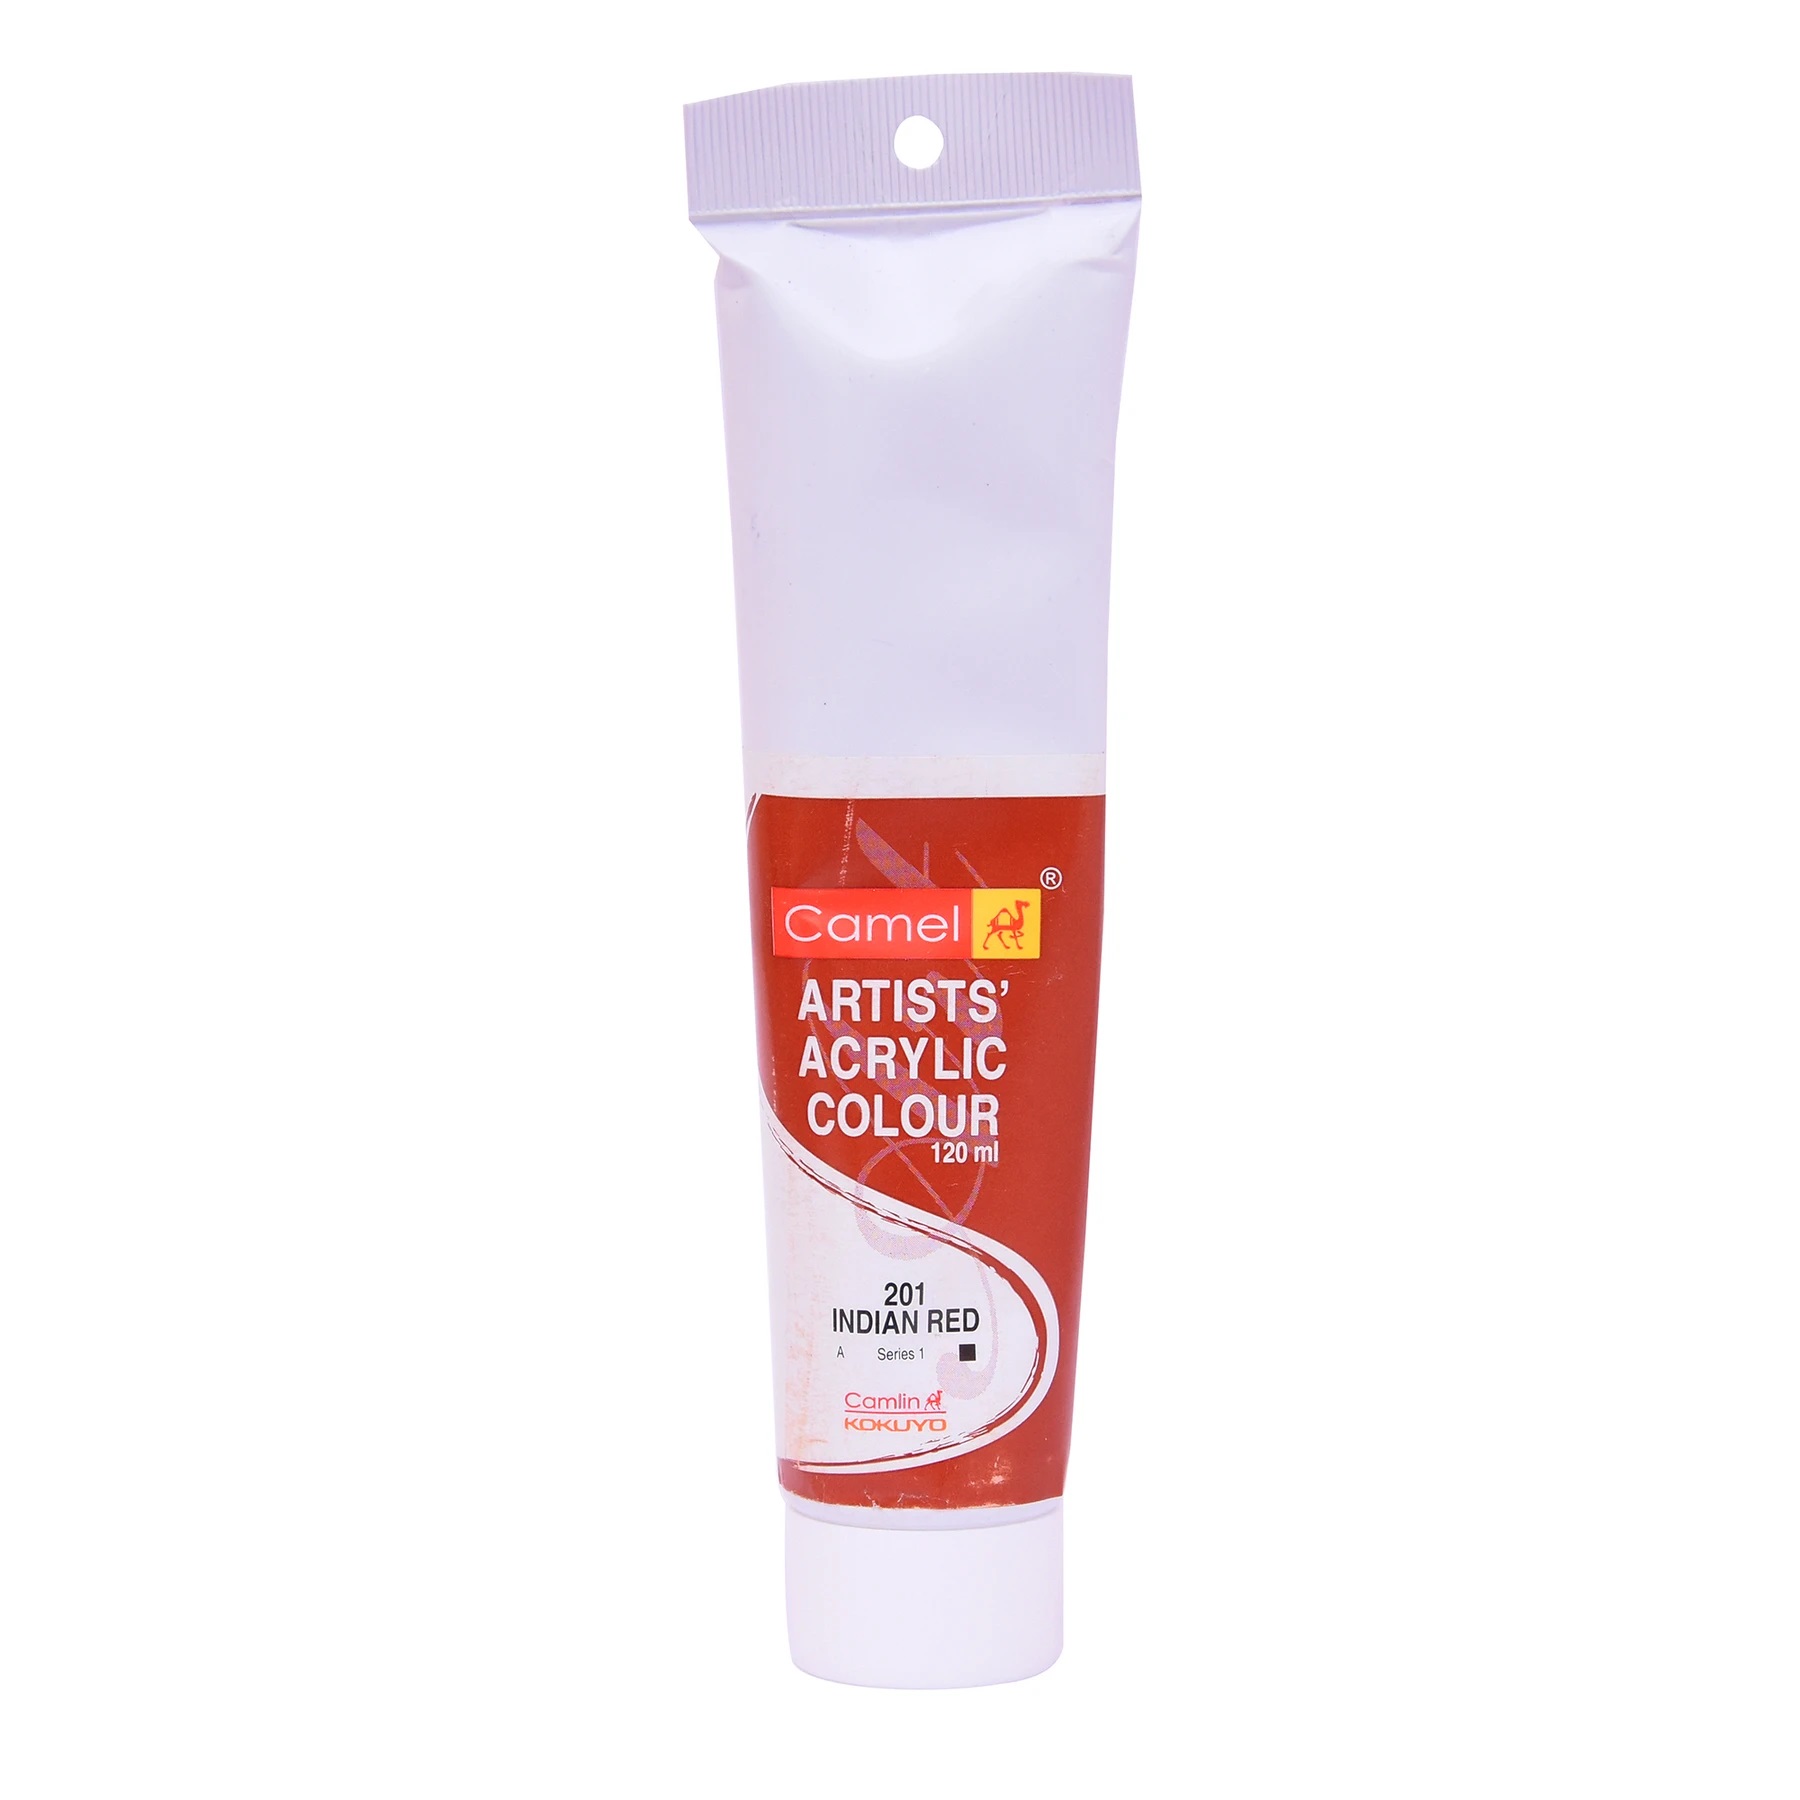 Camel Artist Acrylic Colour 120ml Indian Red 201